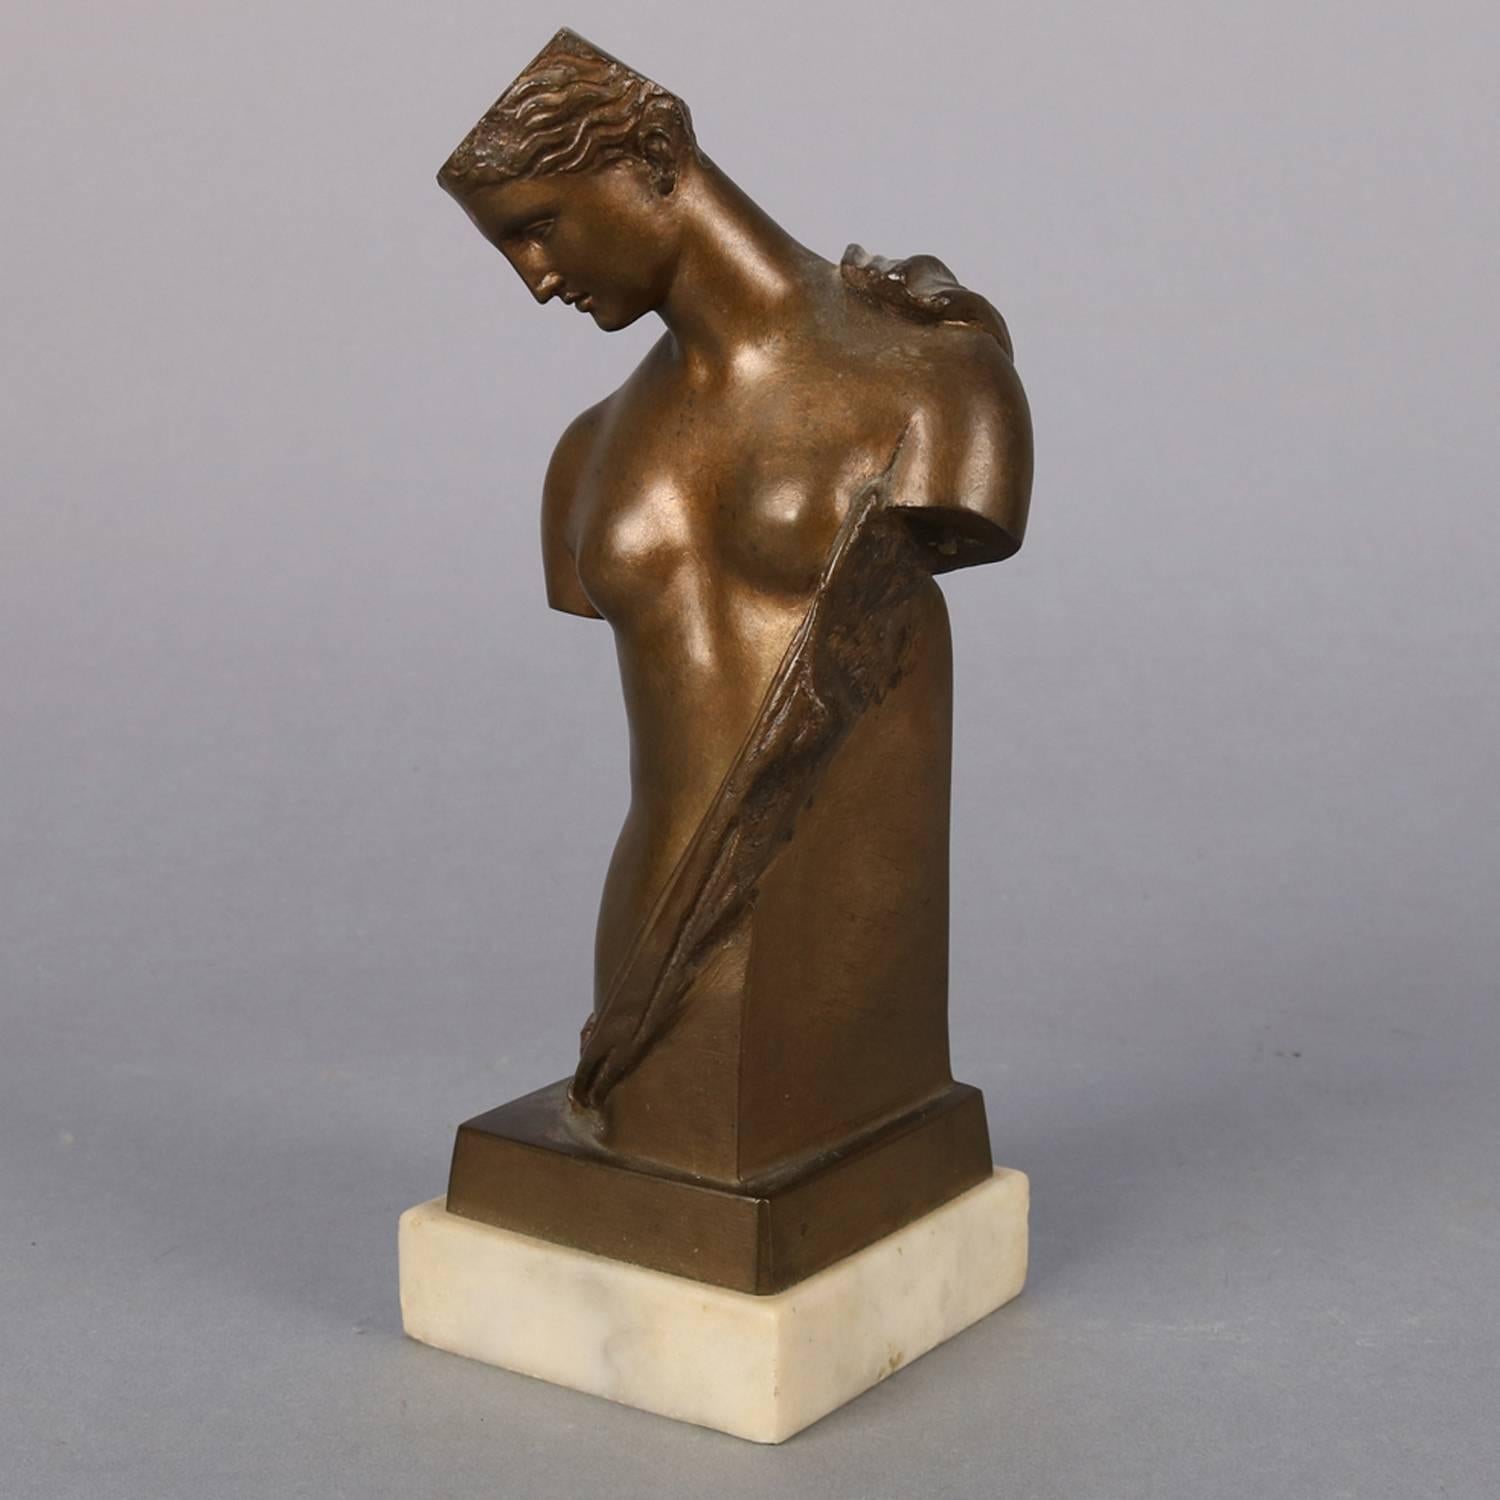 French Antique Classical 3/4 Partial Nude Sculpture Portrait of Woman, Dated 1890